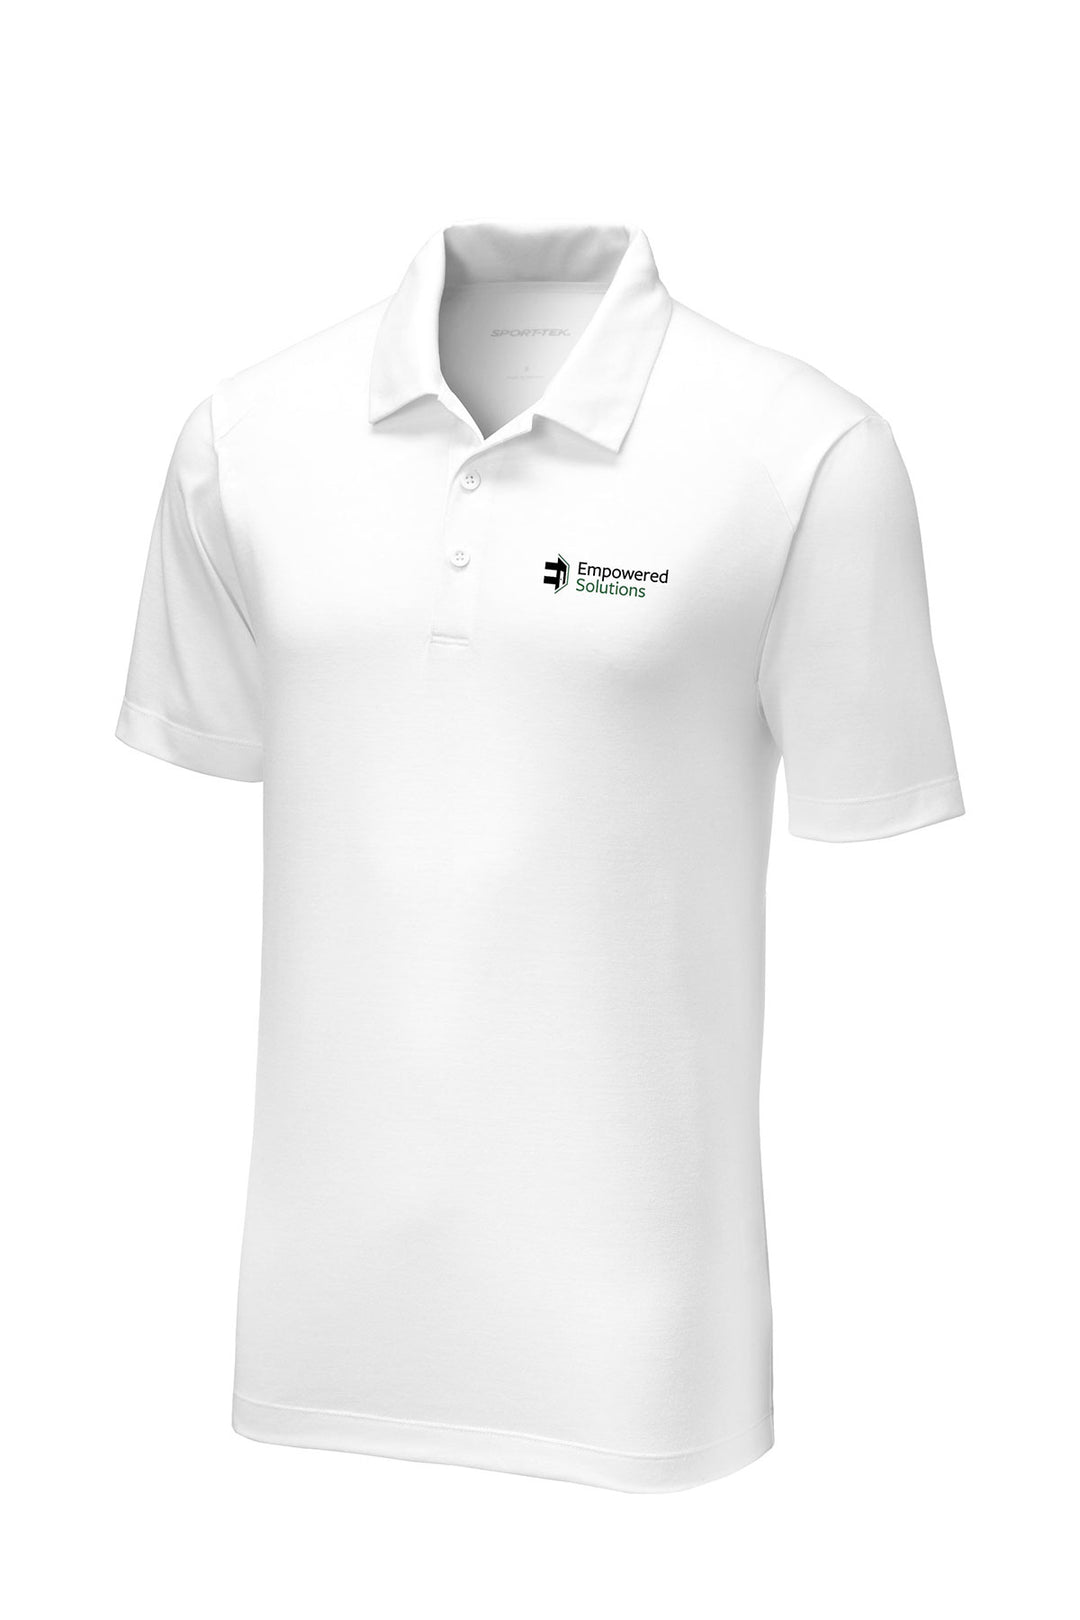 PosiCharge Tri-Blend Wicking Polo- Empowered